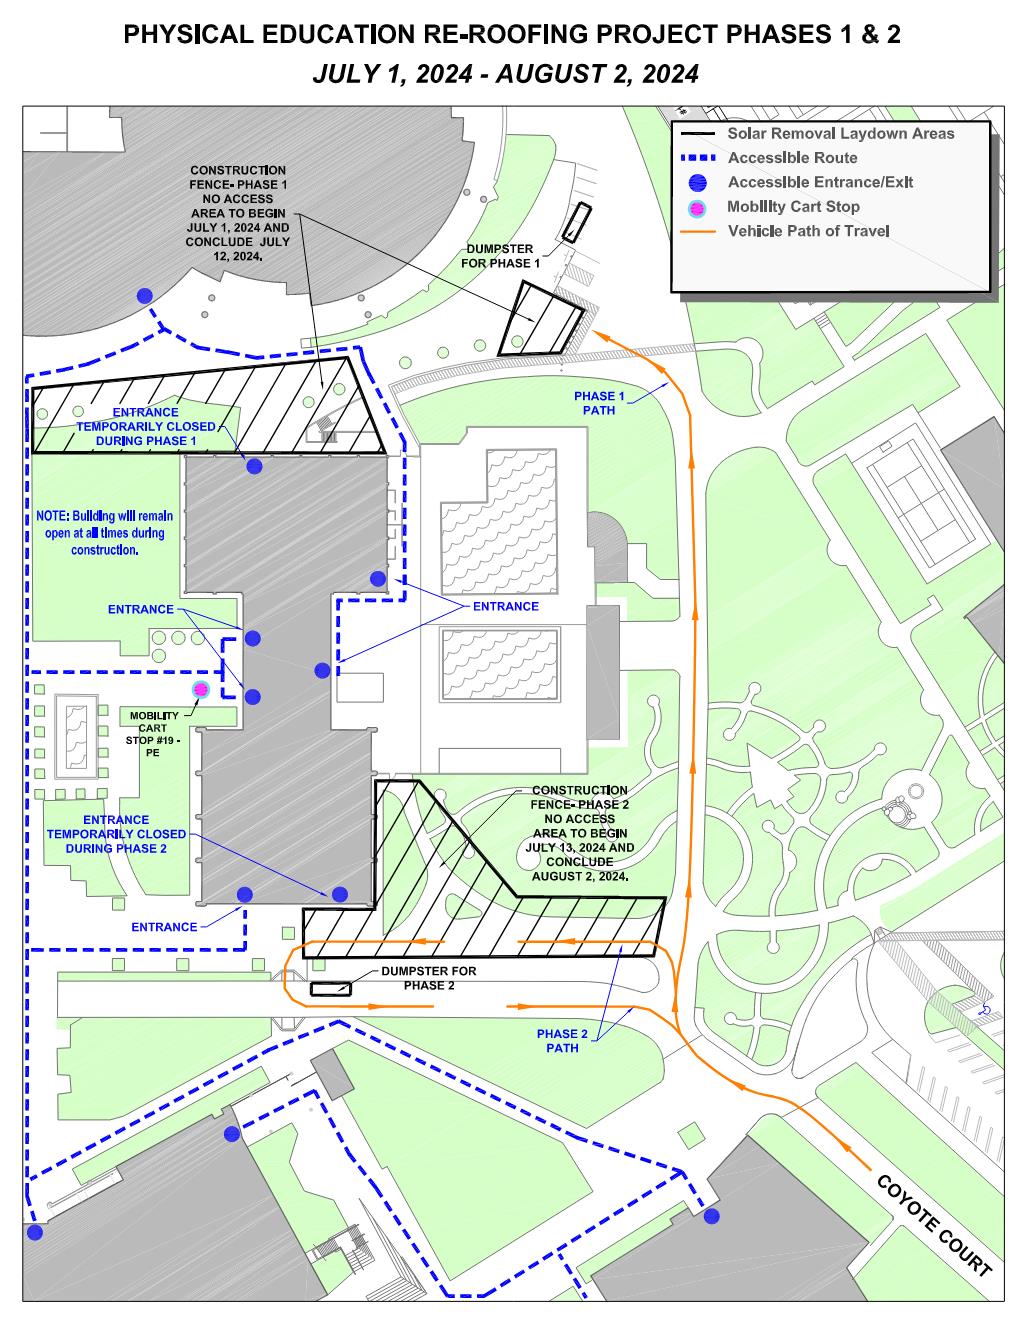 Campus map depicting construction fence areas related to the Physical Education Building Roof Replacement project. 